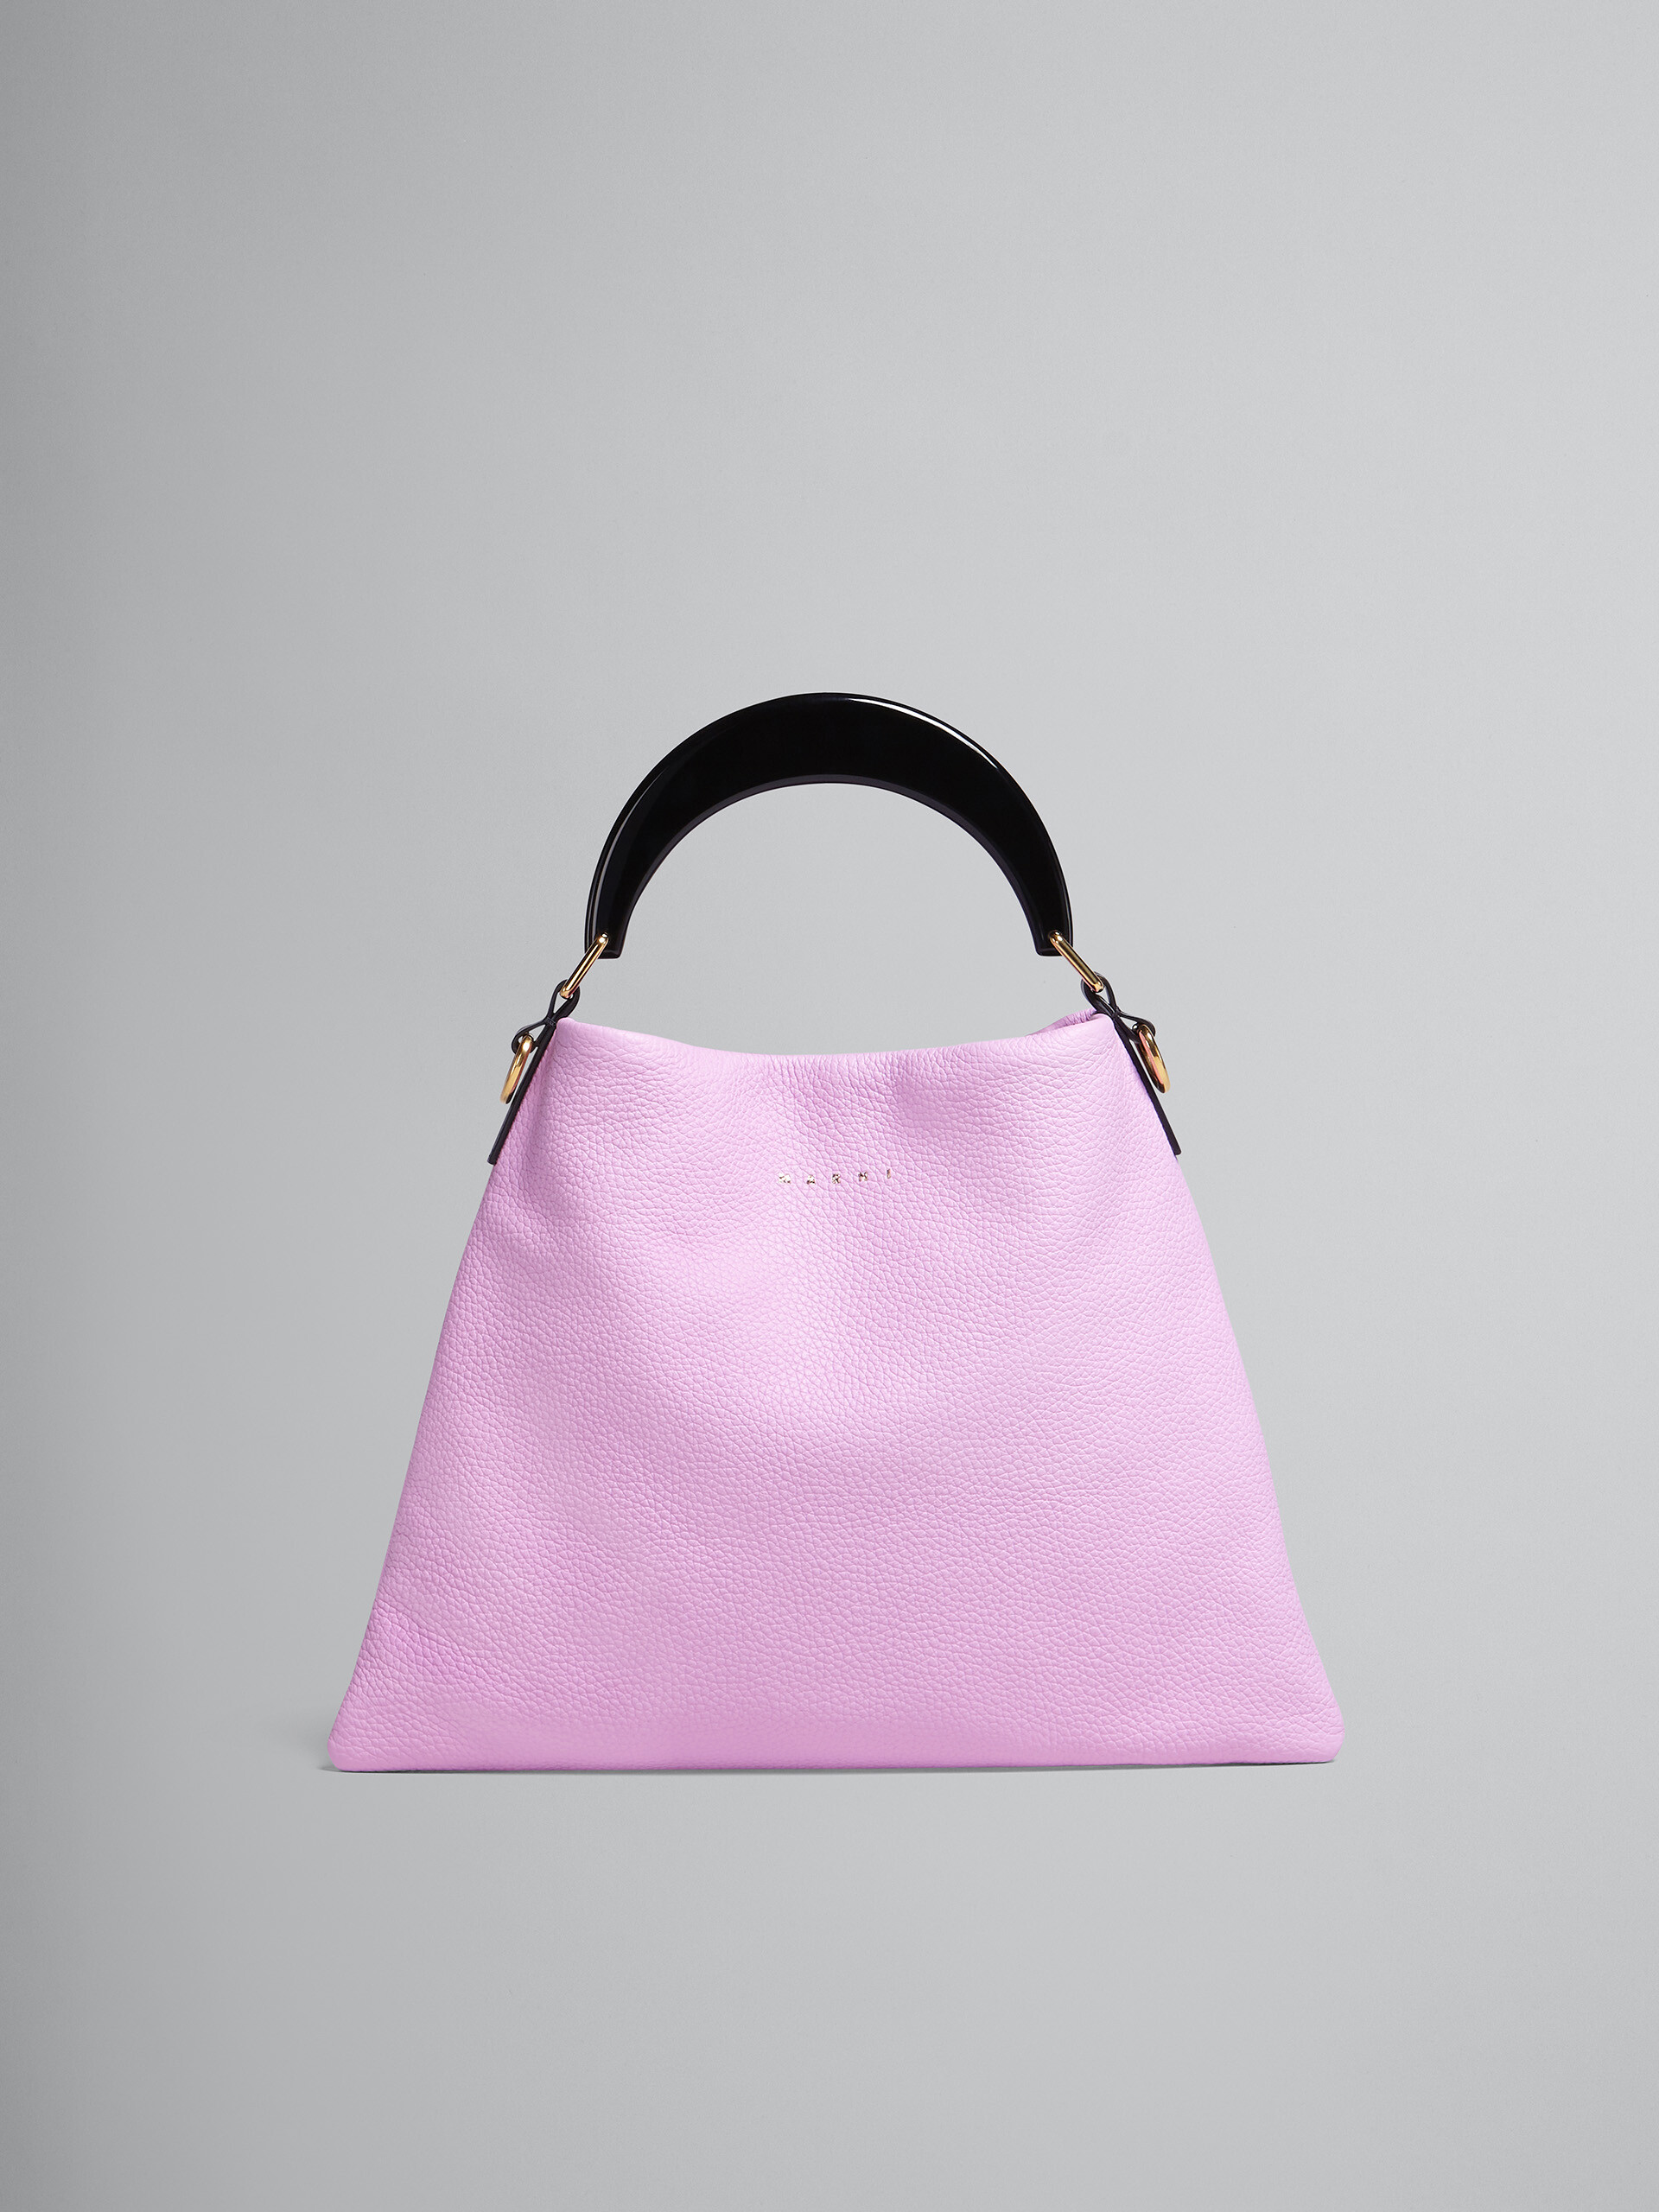 Venice small bag in pink leather - Shoulder Bags - Image 1